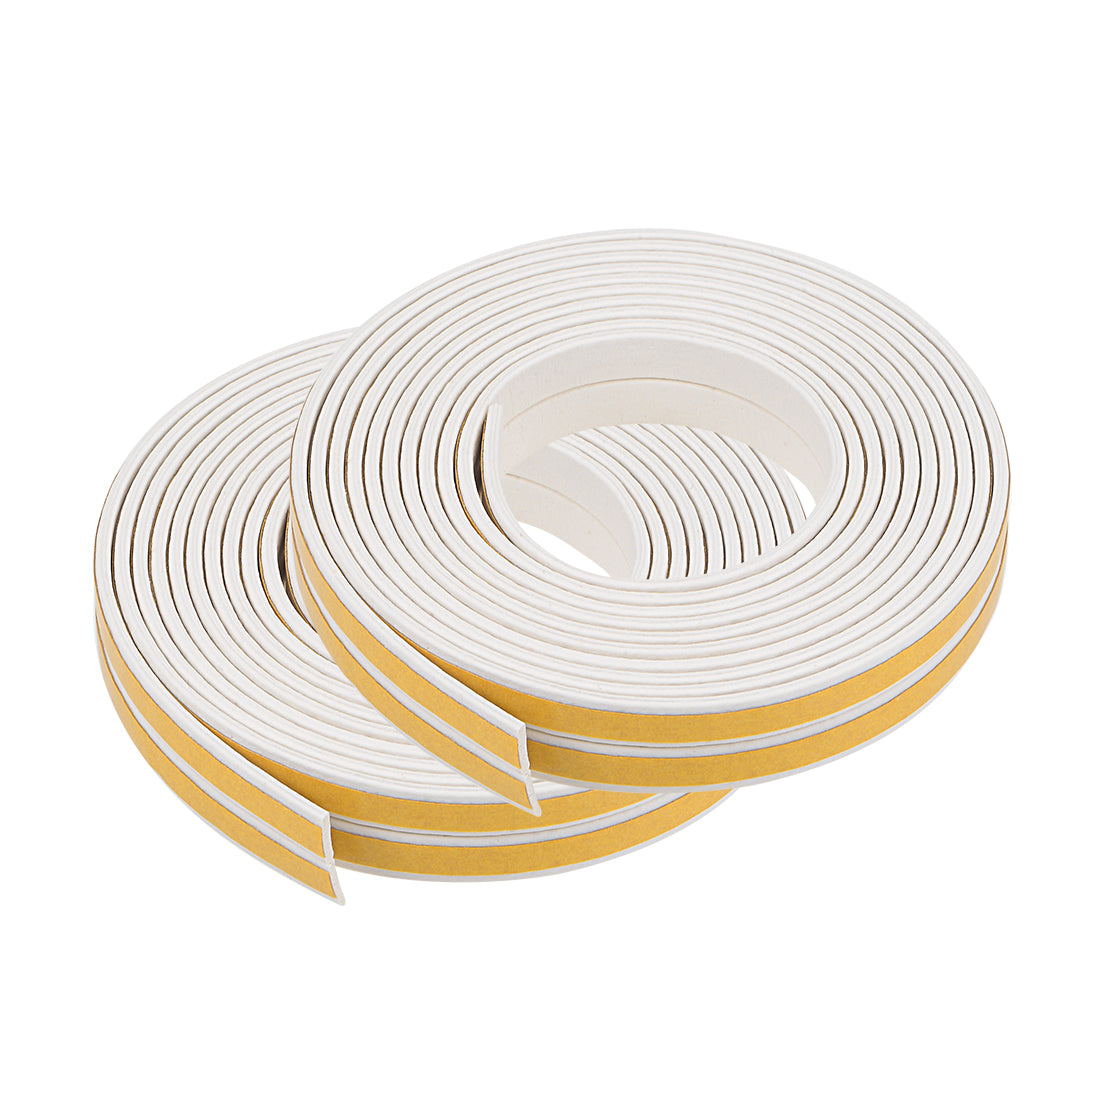 uxcell Uxcell Foam Tape Adhesive Weather Stripping 9mm Wide 2mm Thick, 2.5 Meters White, 2Pcs